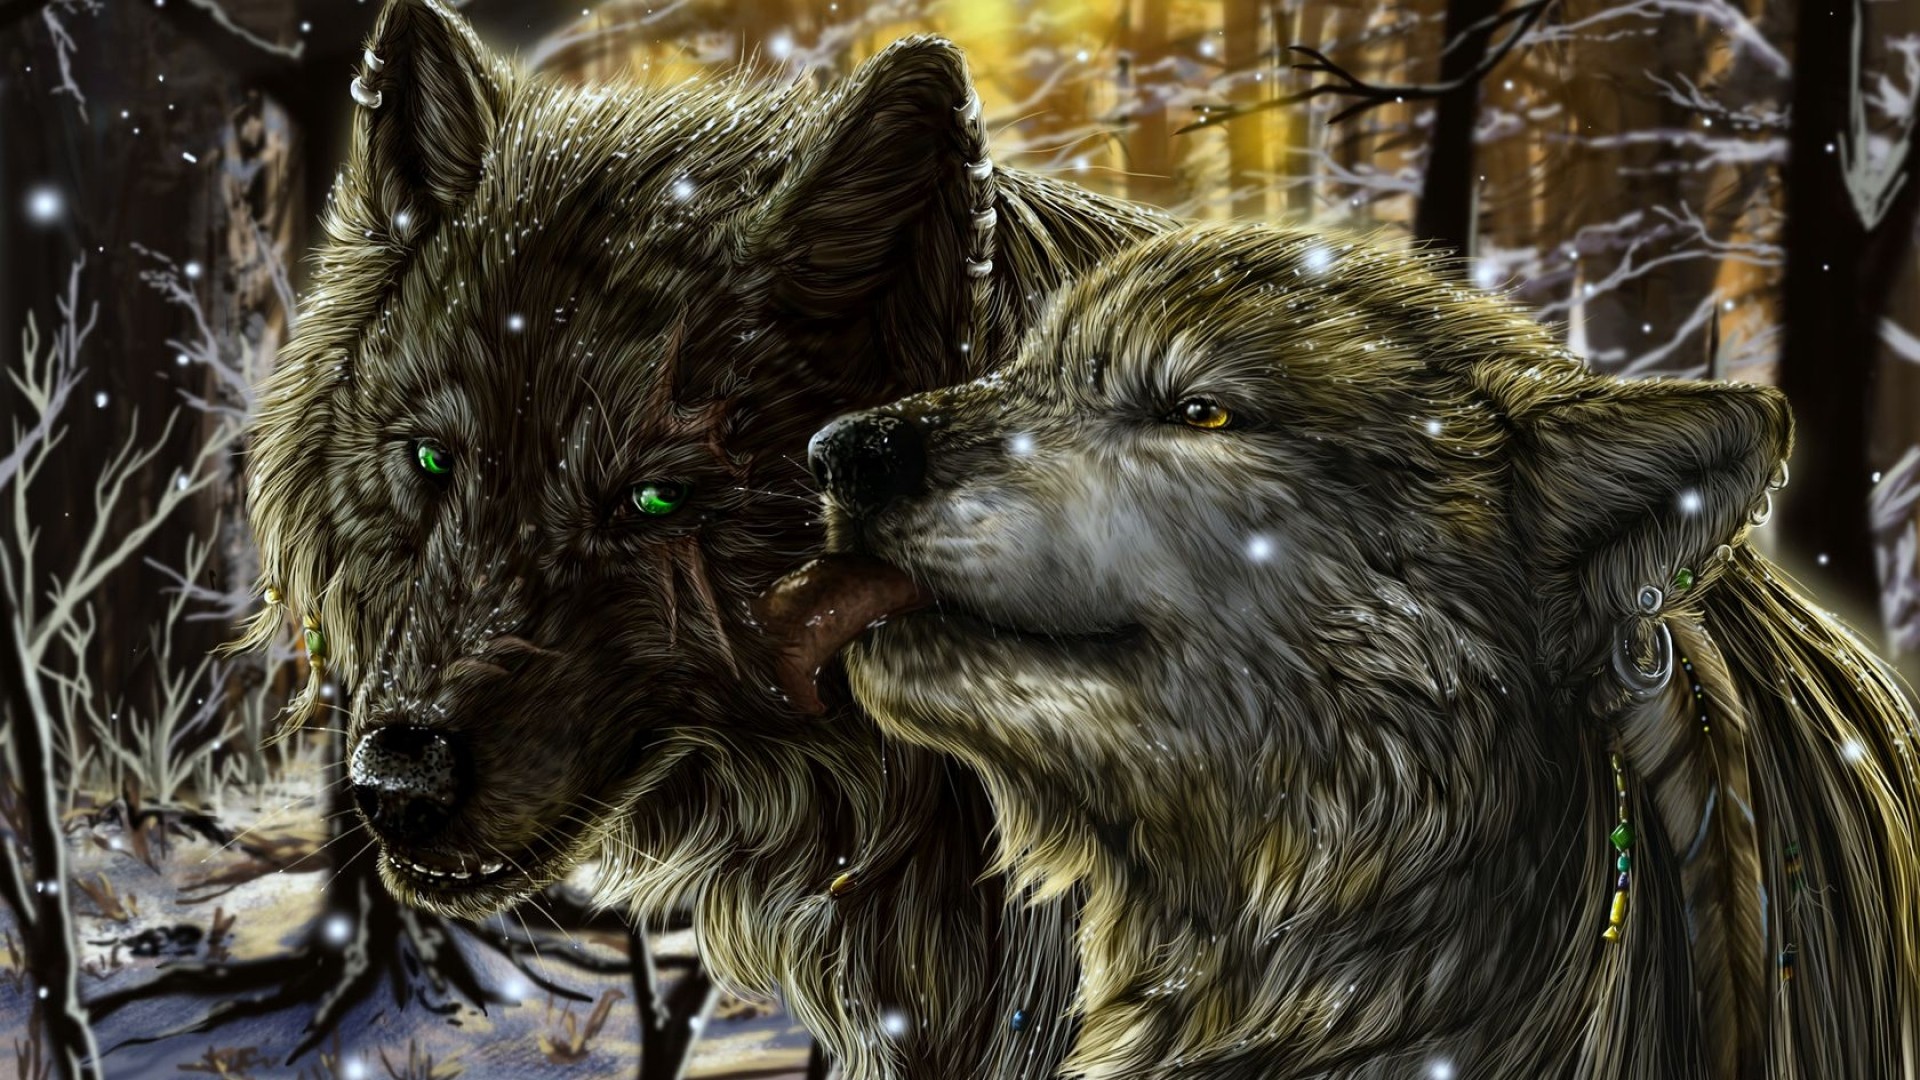 1920x1080 wolf couple winter snowfall romantic green eyes forest